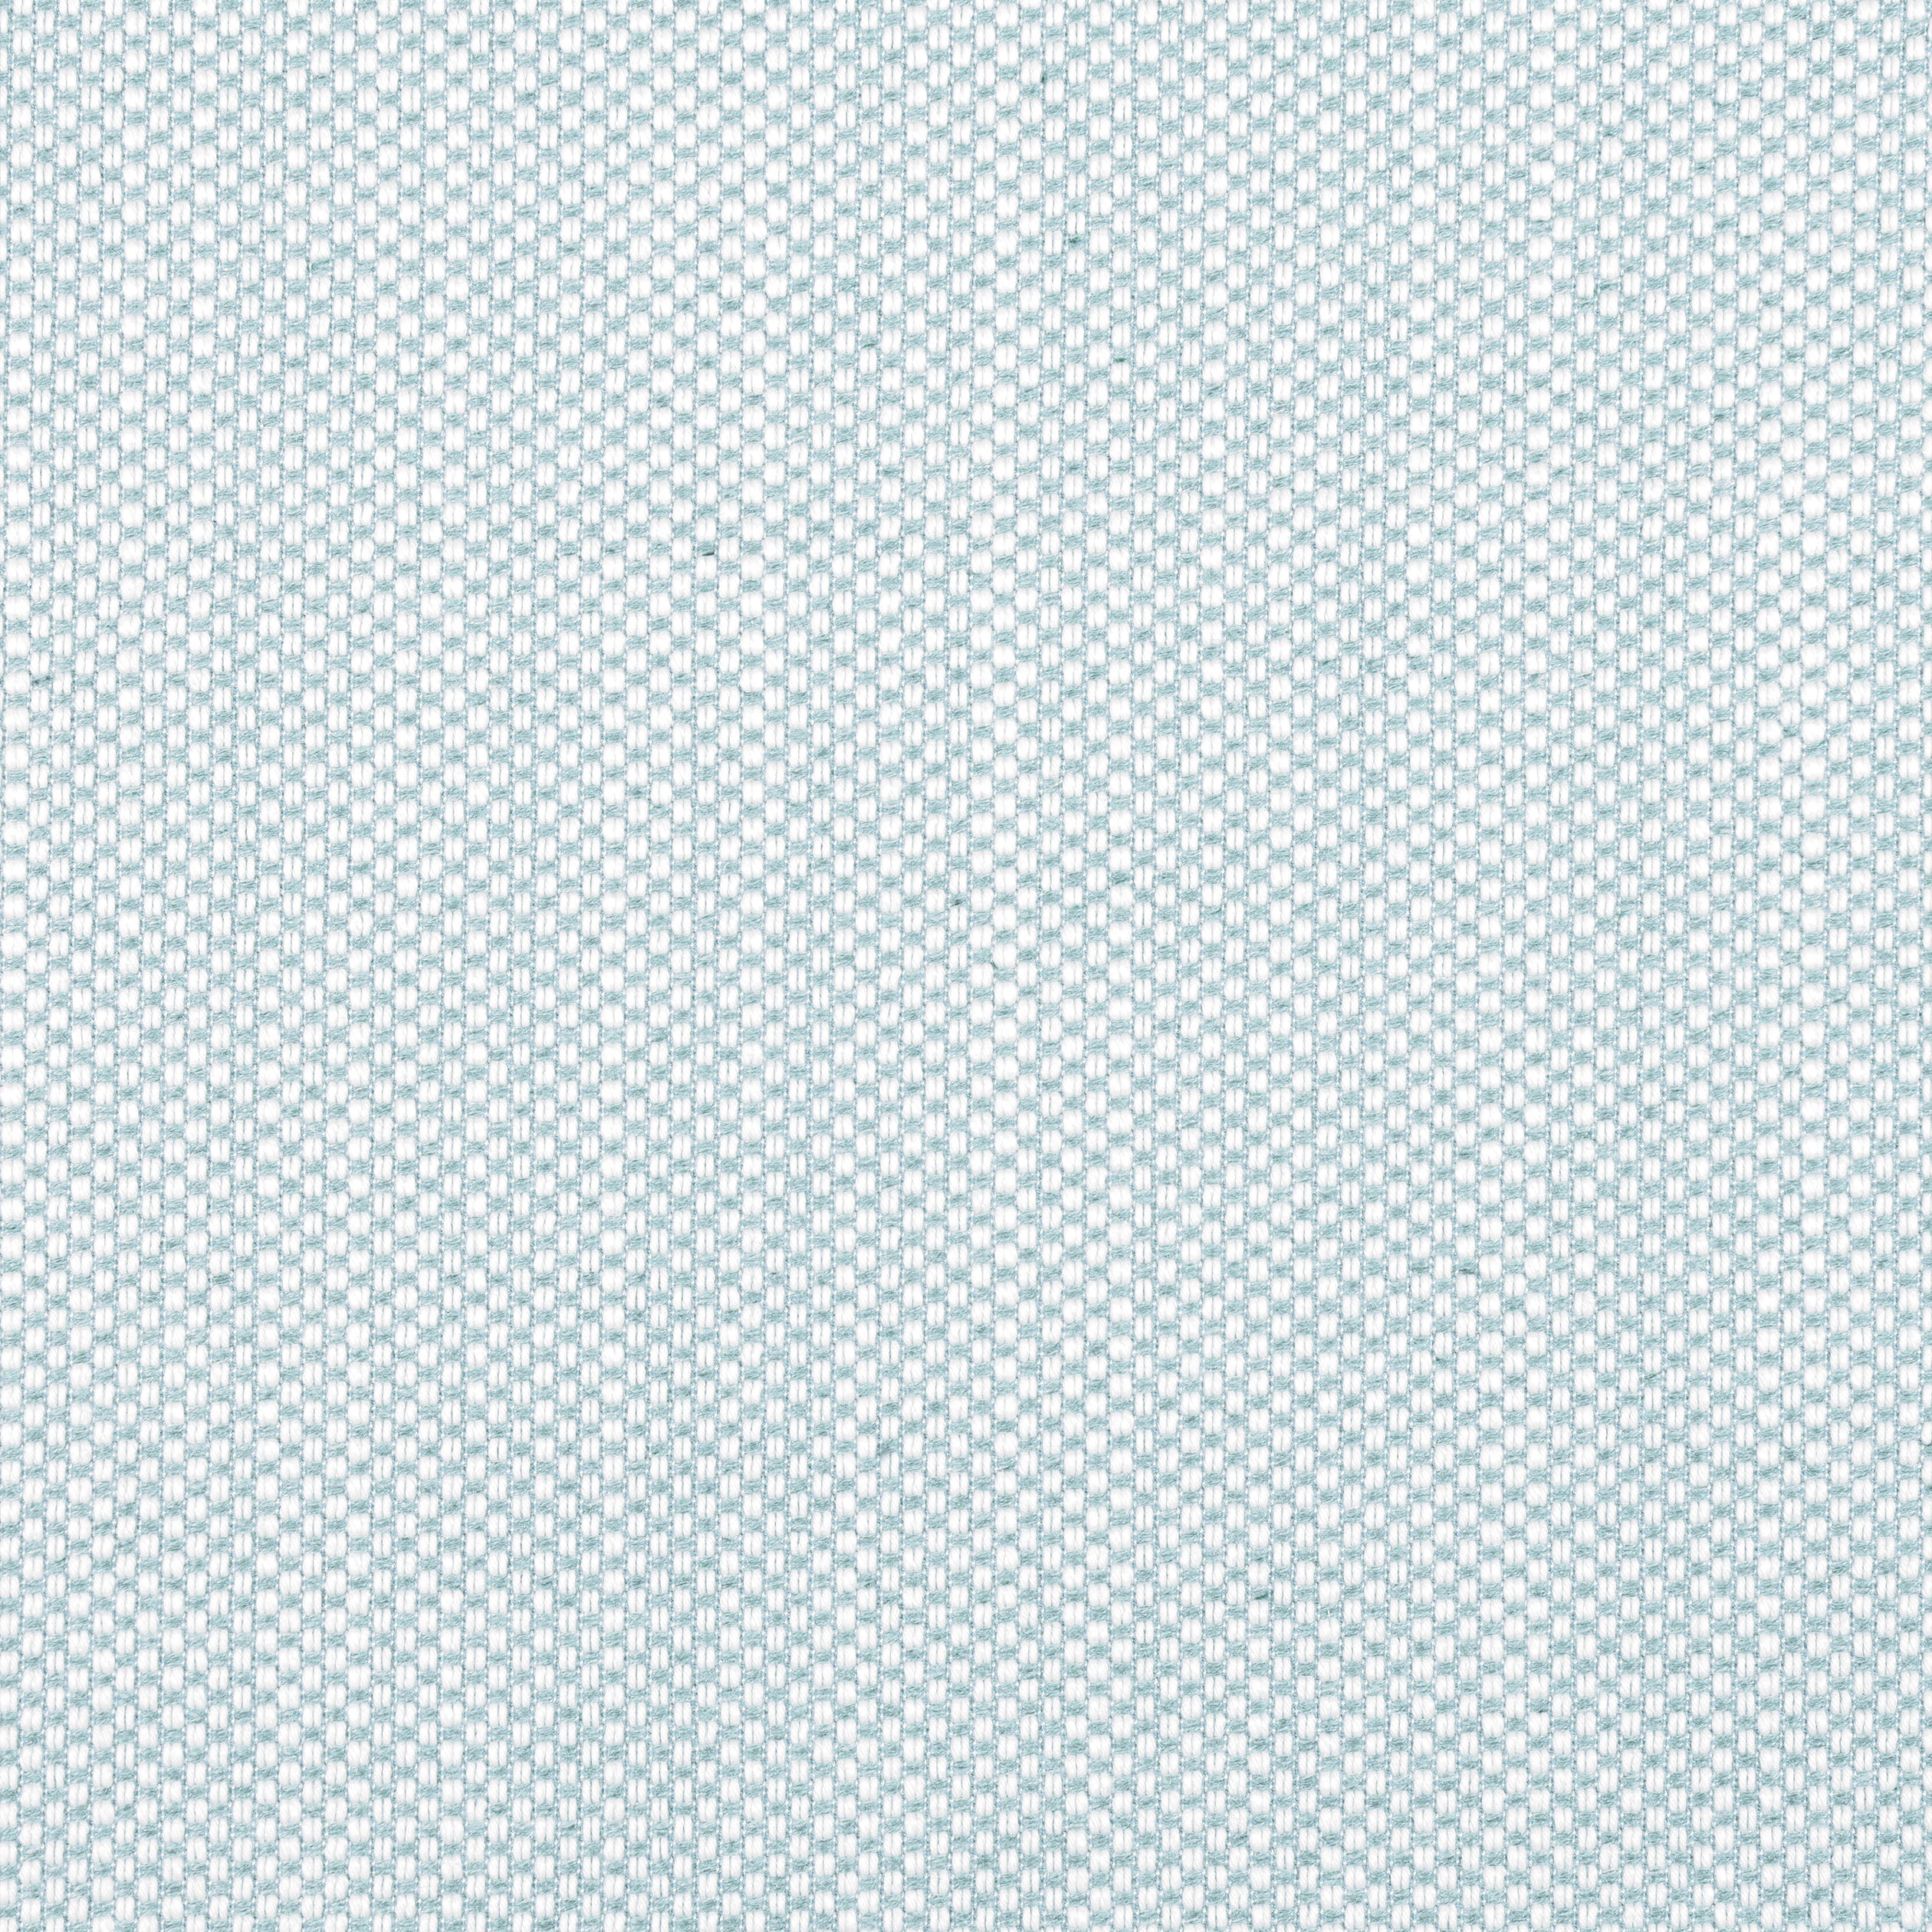 Ravenna fabric in seafoam color - pattern number W8618 - by Thibaut in the Villa Textures collection